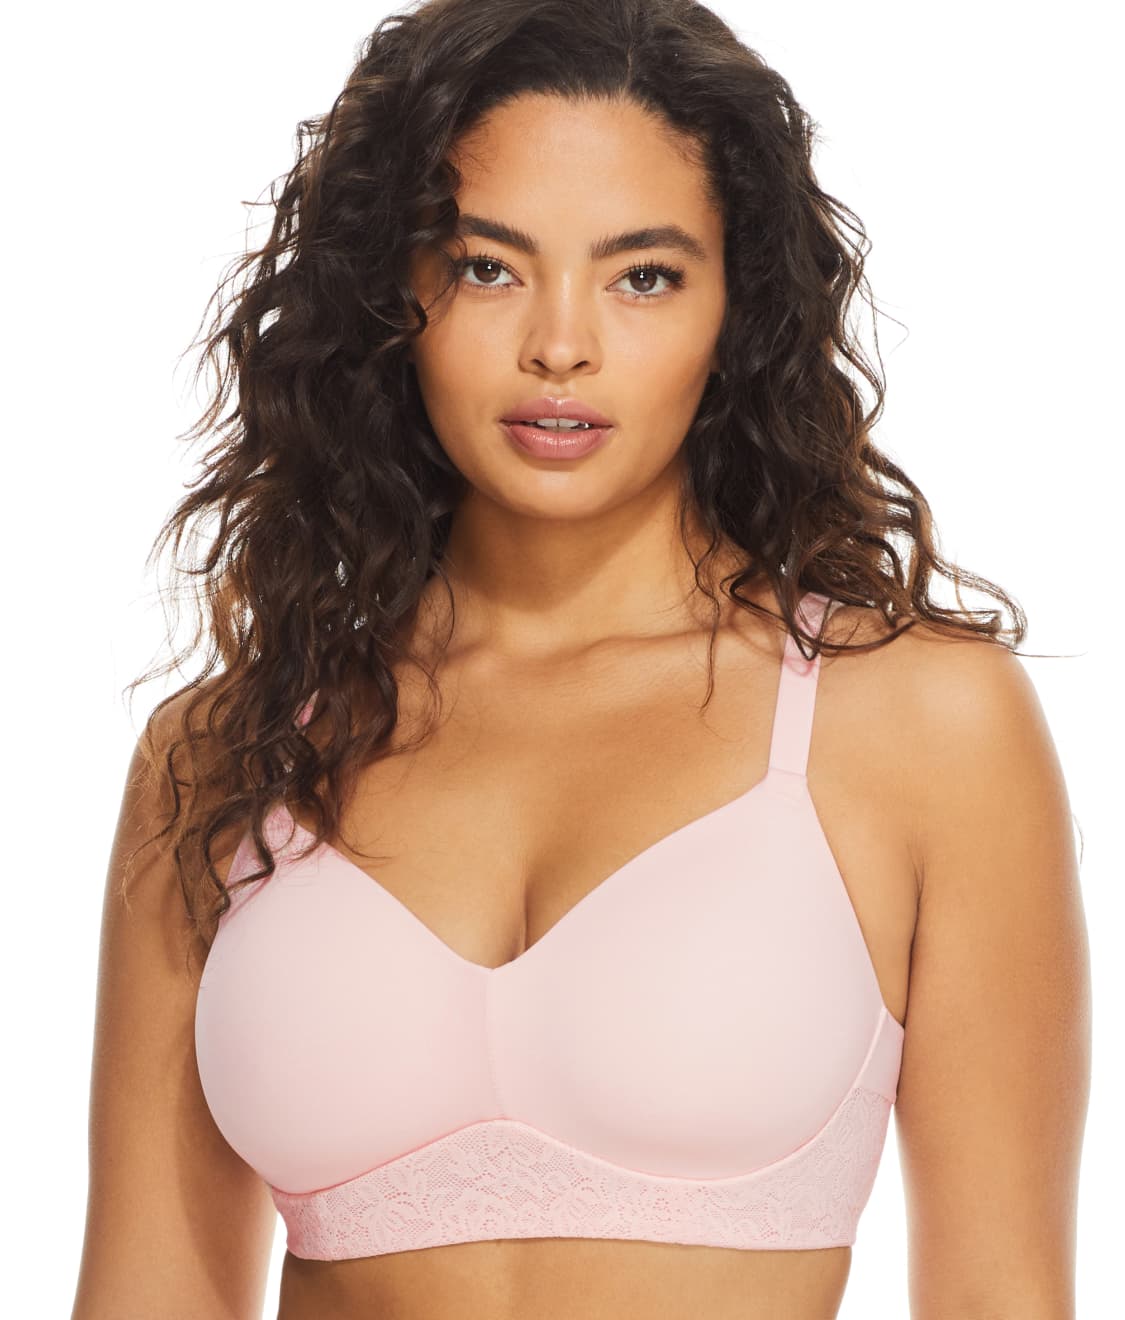 Women's Everyday Bra, Gathered, Supportive, Breathable And